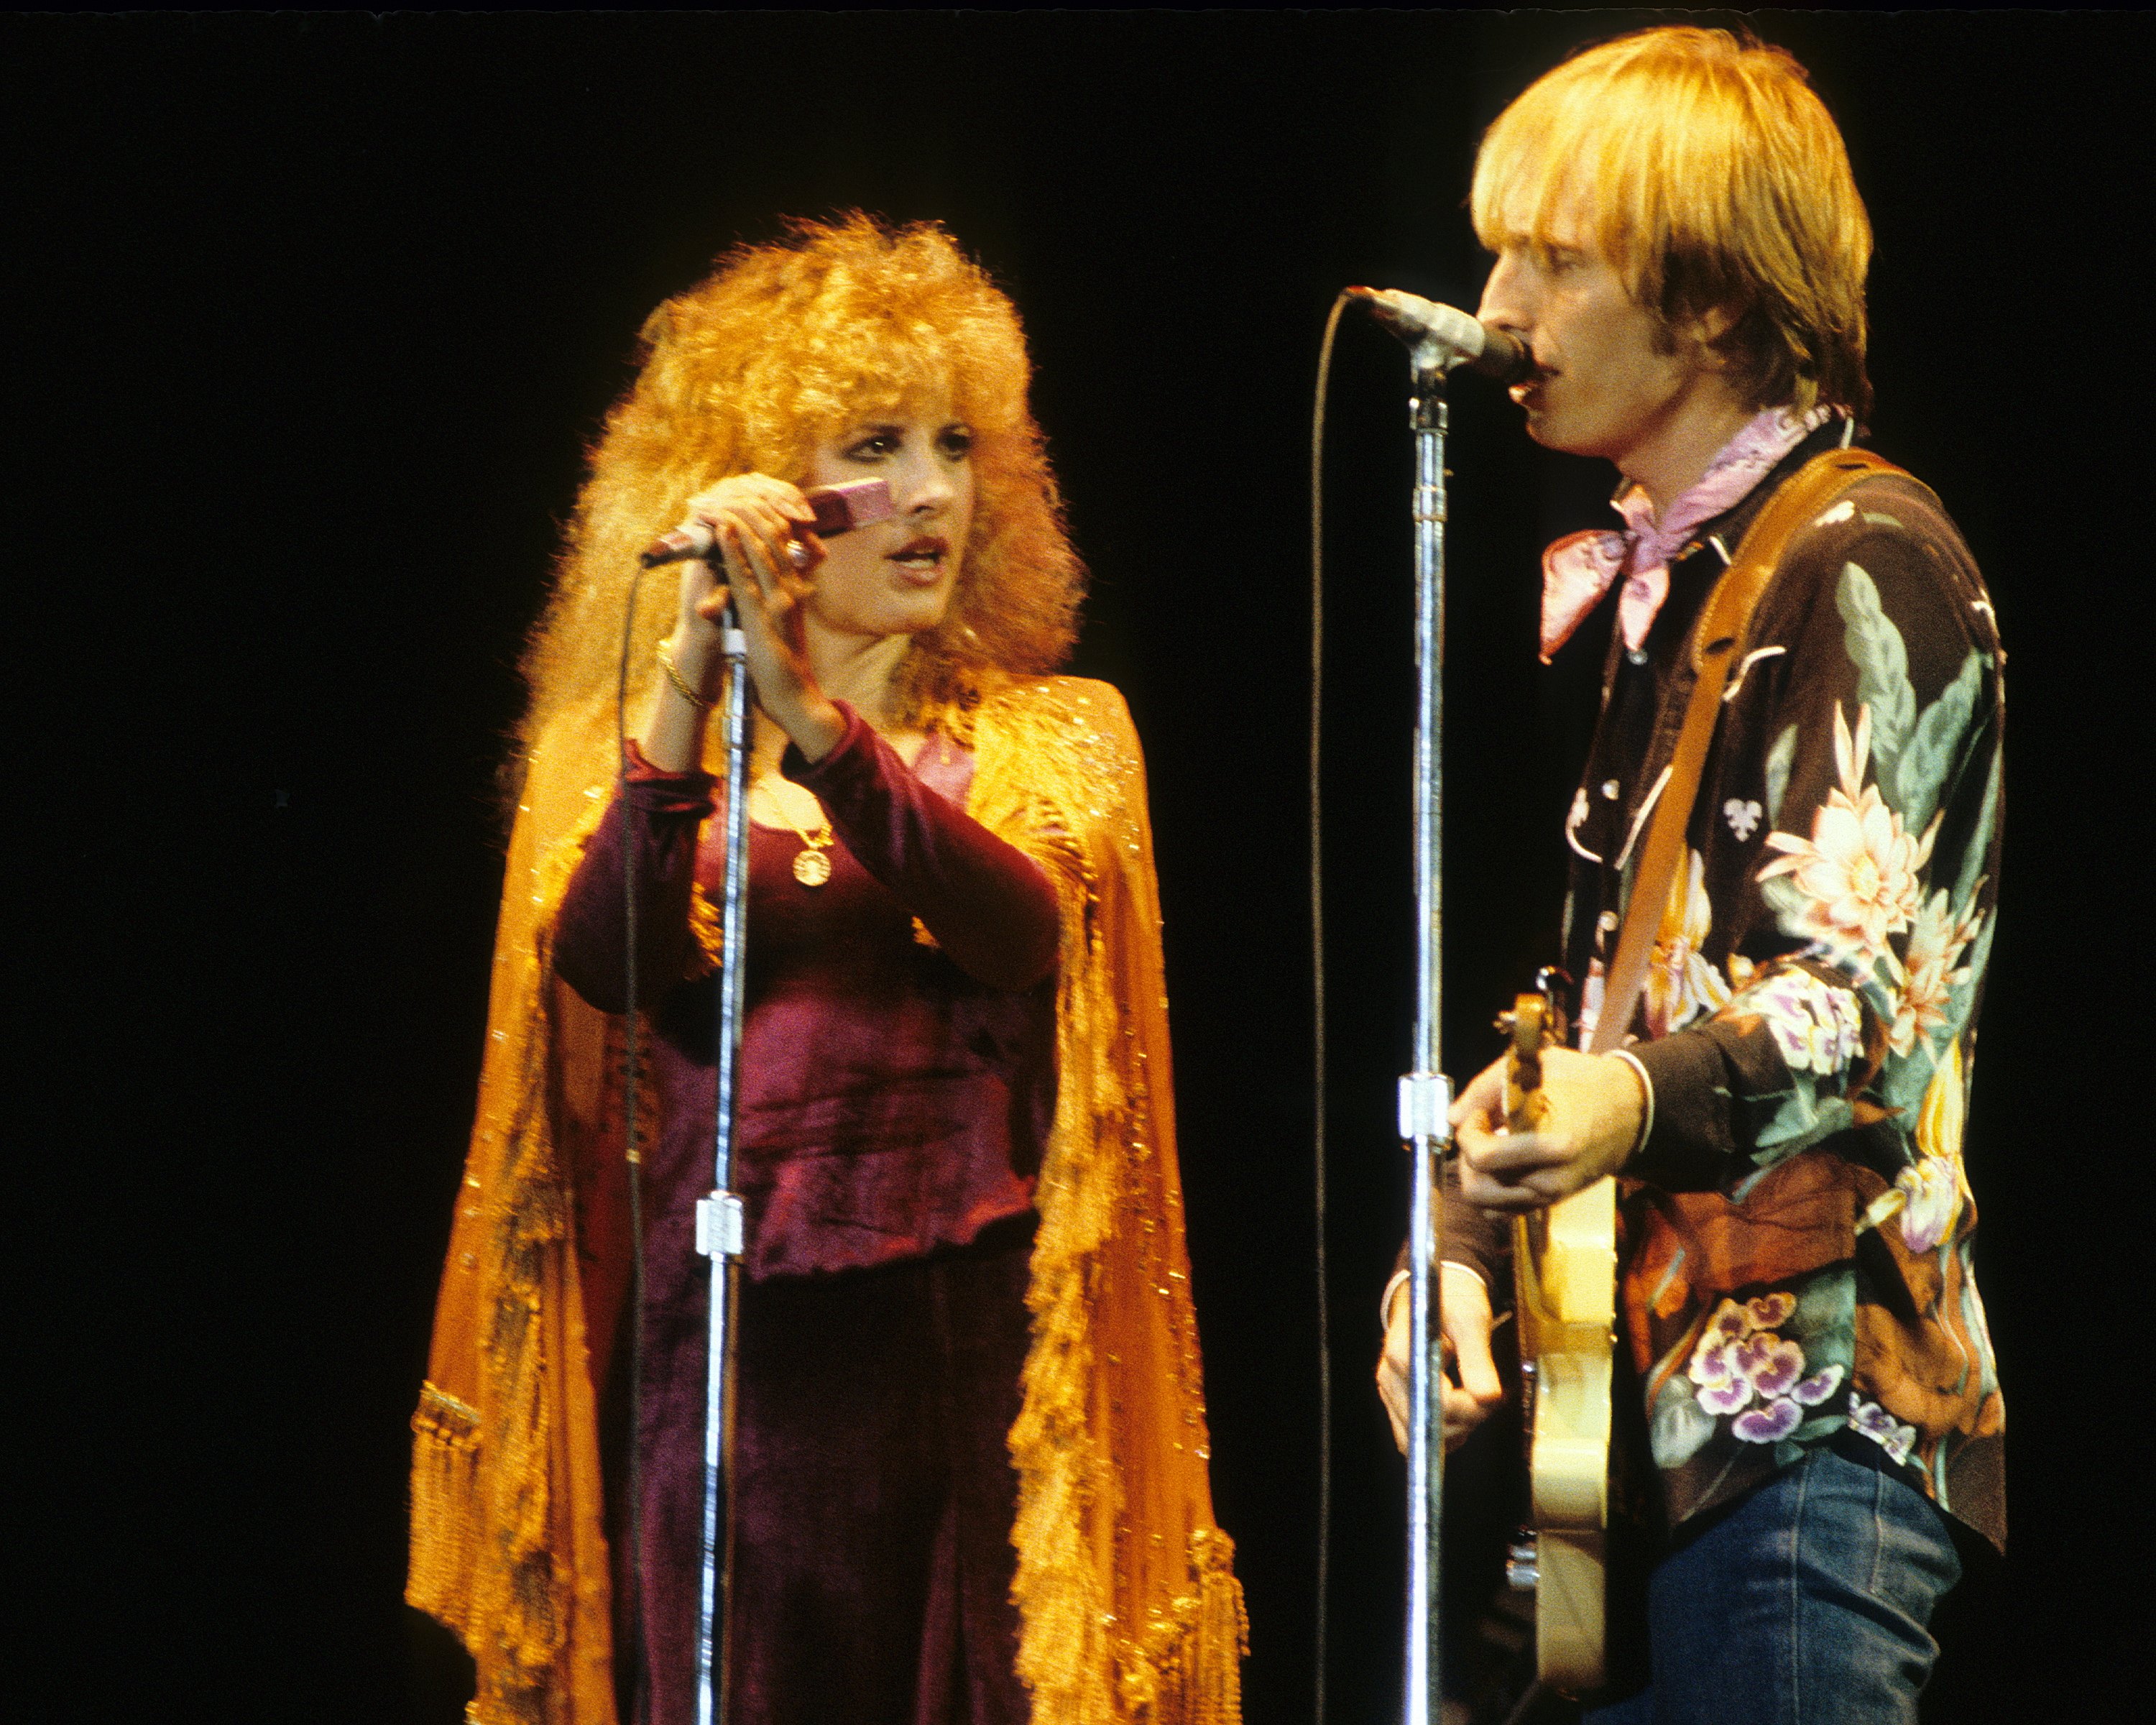 Stevie Nicks and Tom Petty sing into microphones. Petty plays the guitar.